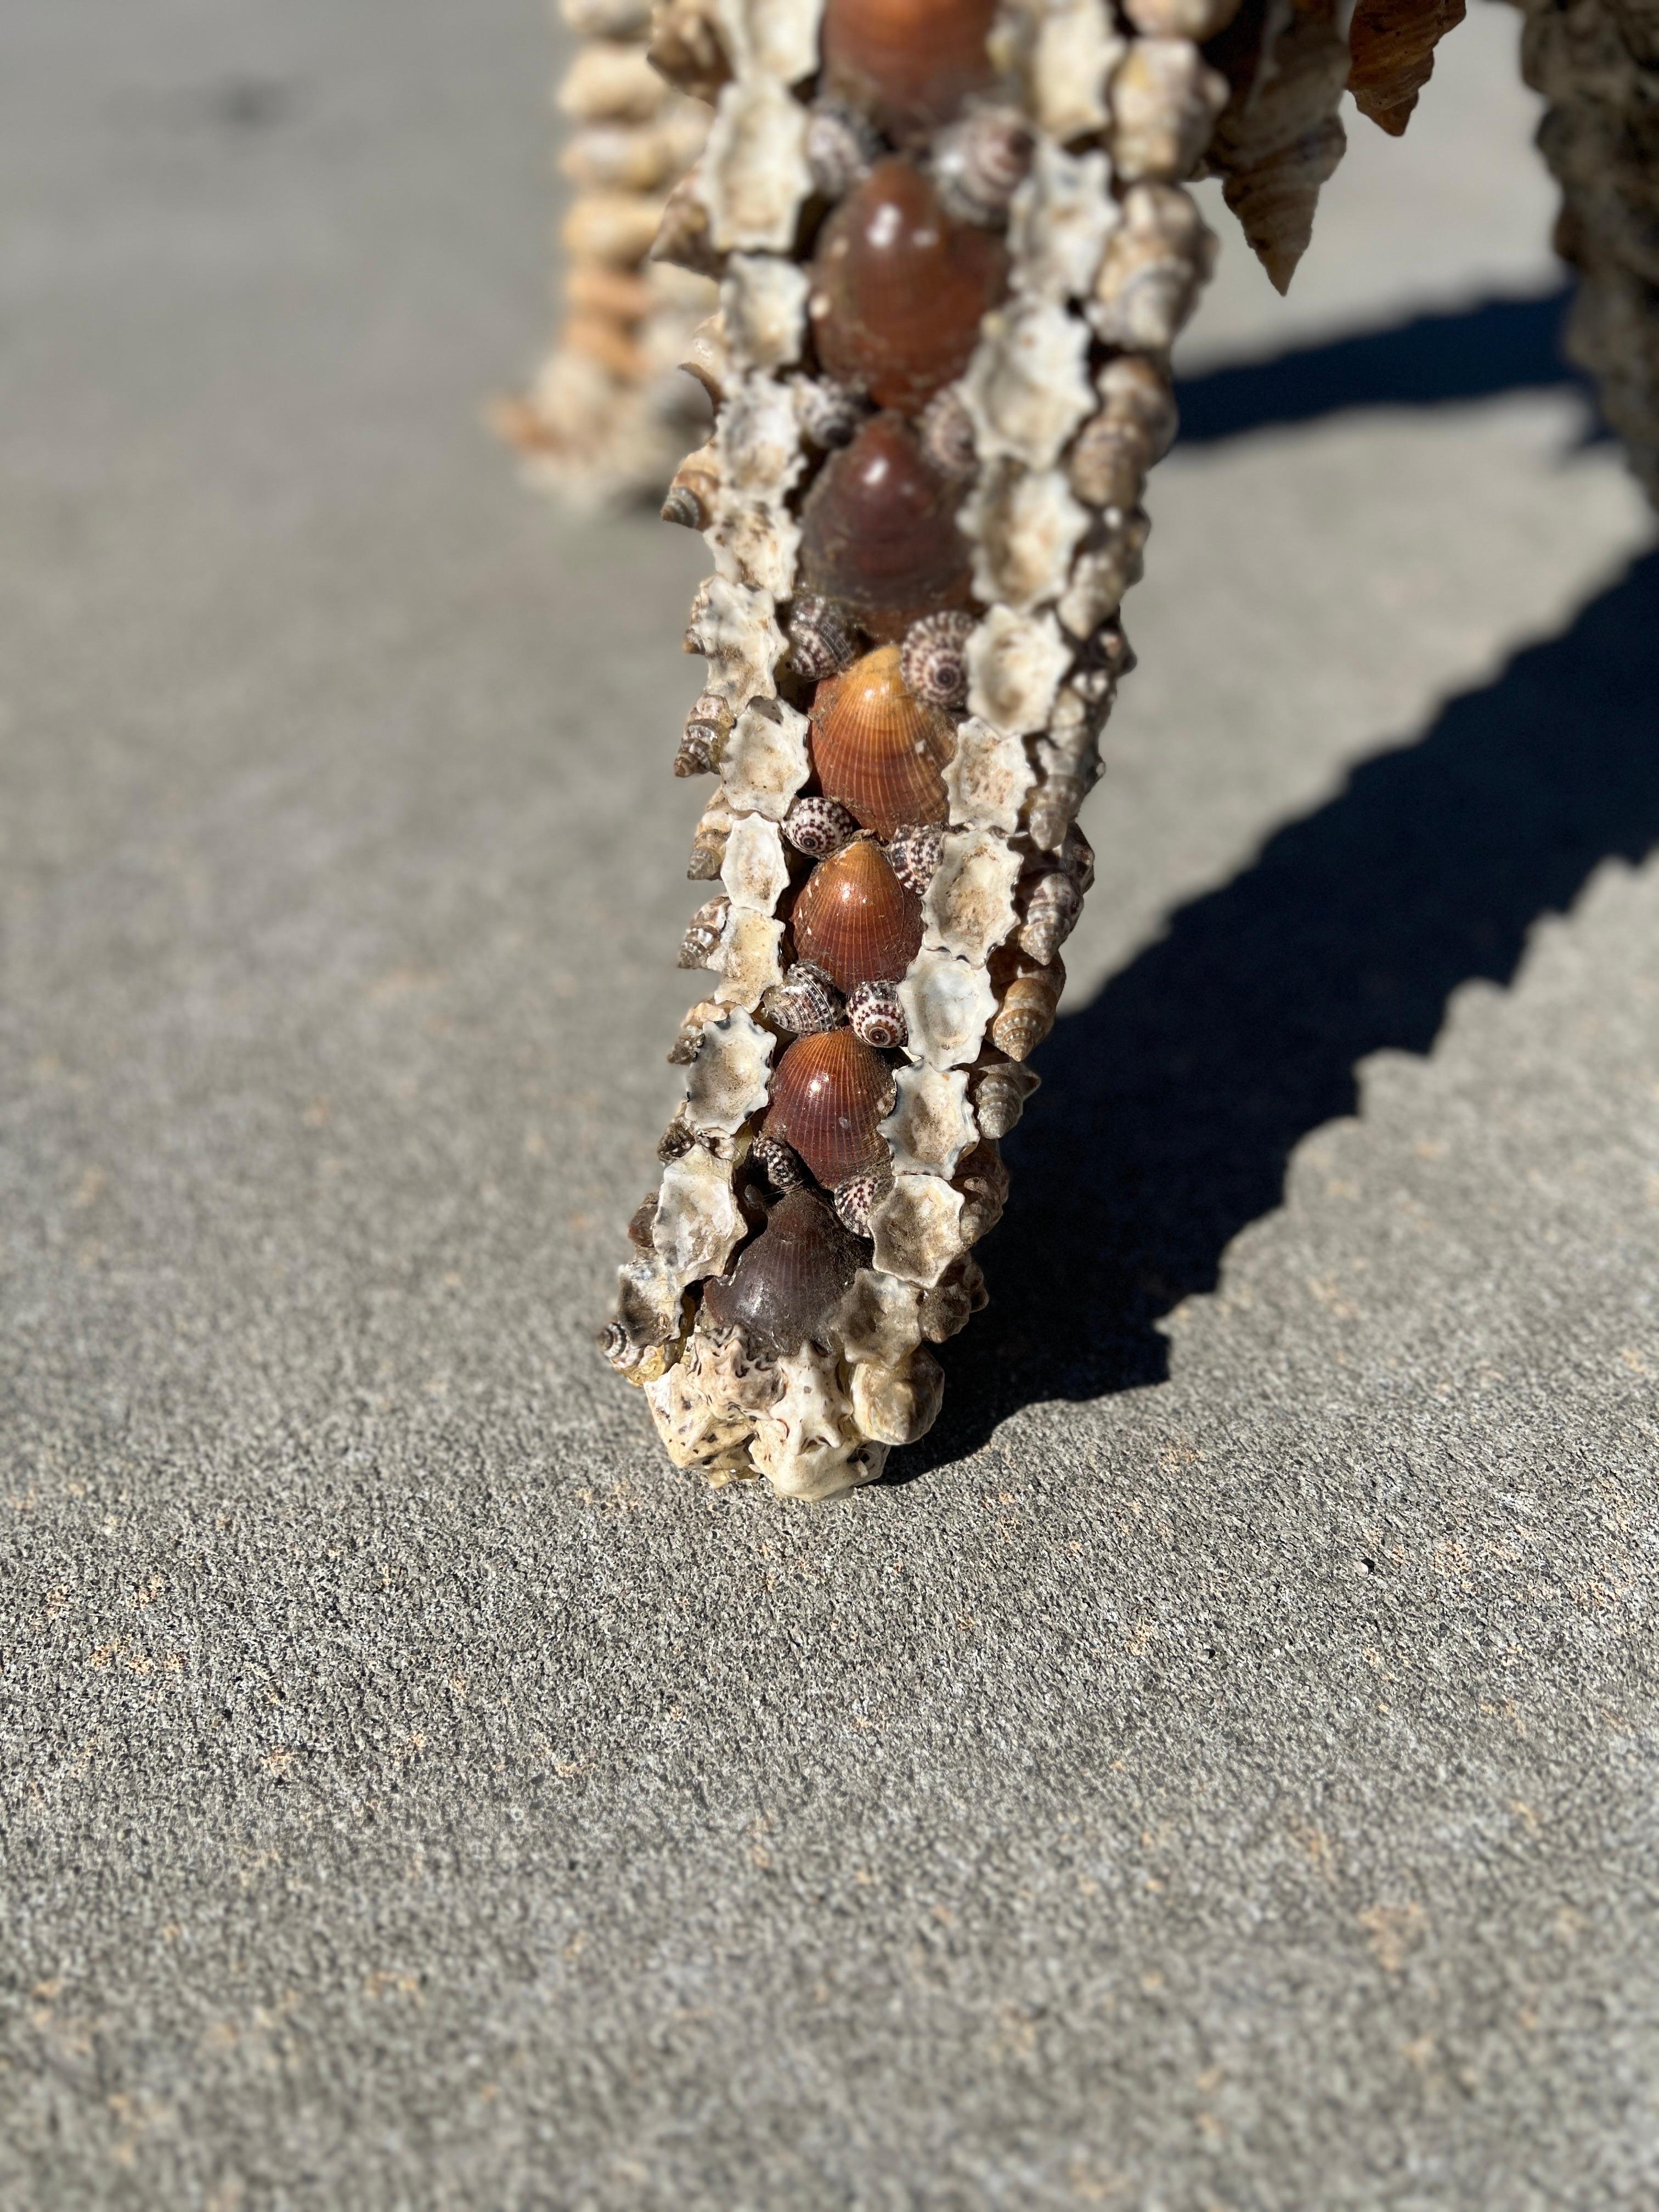 American or Italian, mid 20th century.

A vintage seashell encrusted tripod side table with a fantastic seashell resin set top.